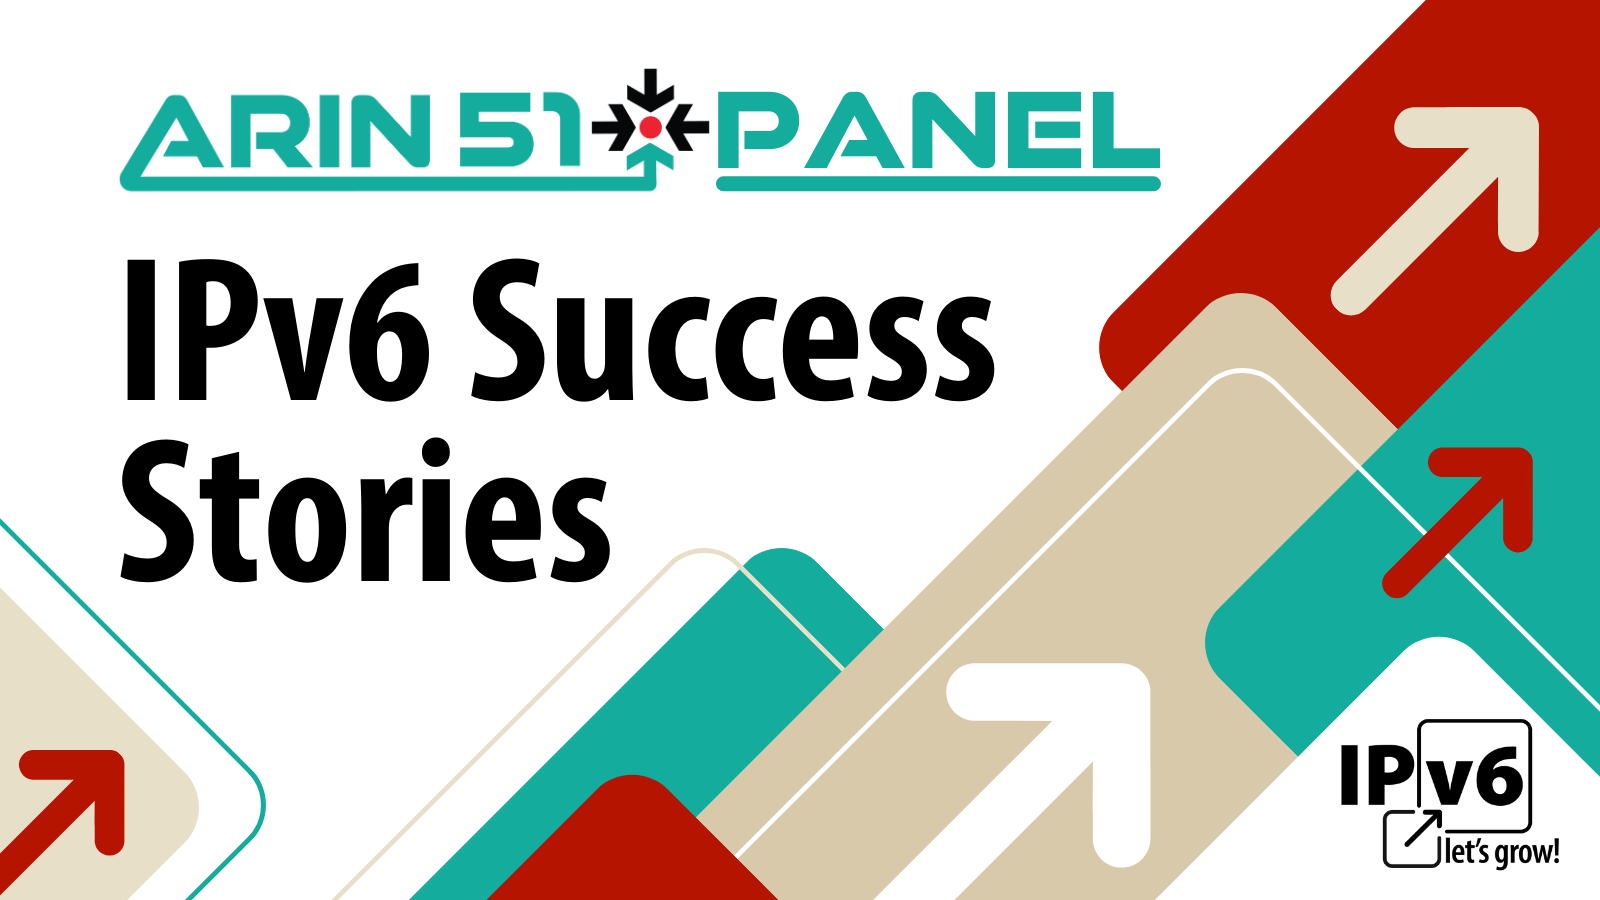 IPv6 Success Stories Shared in ARIN 51 Panel